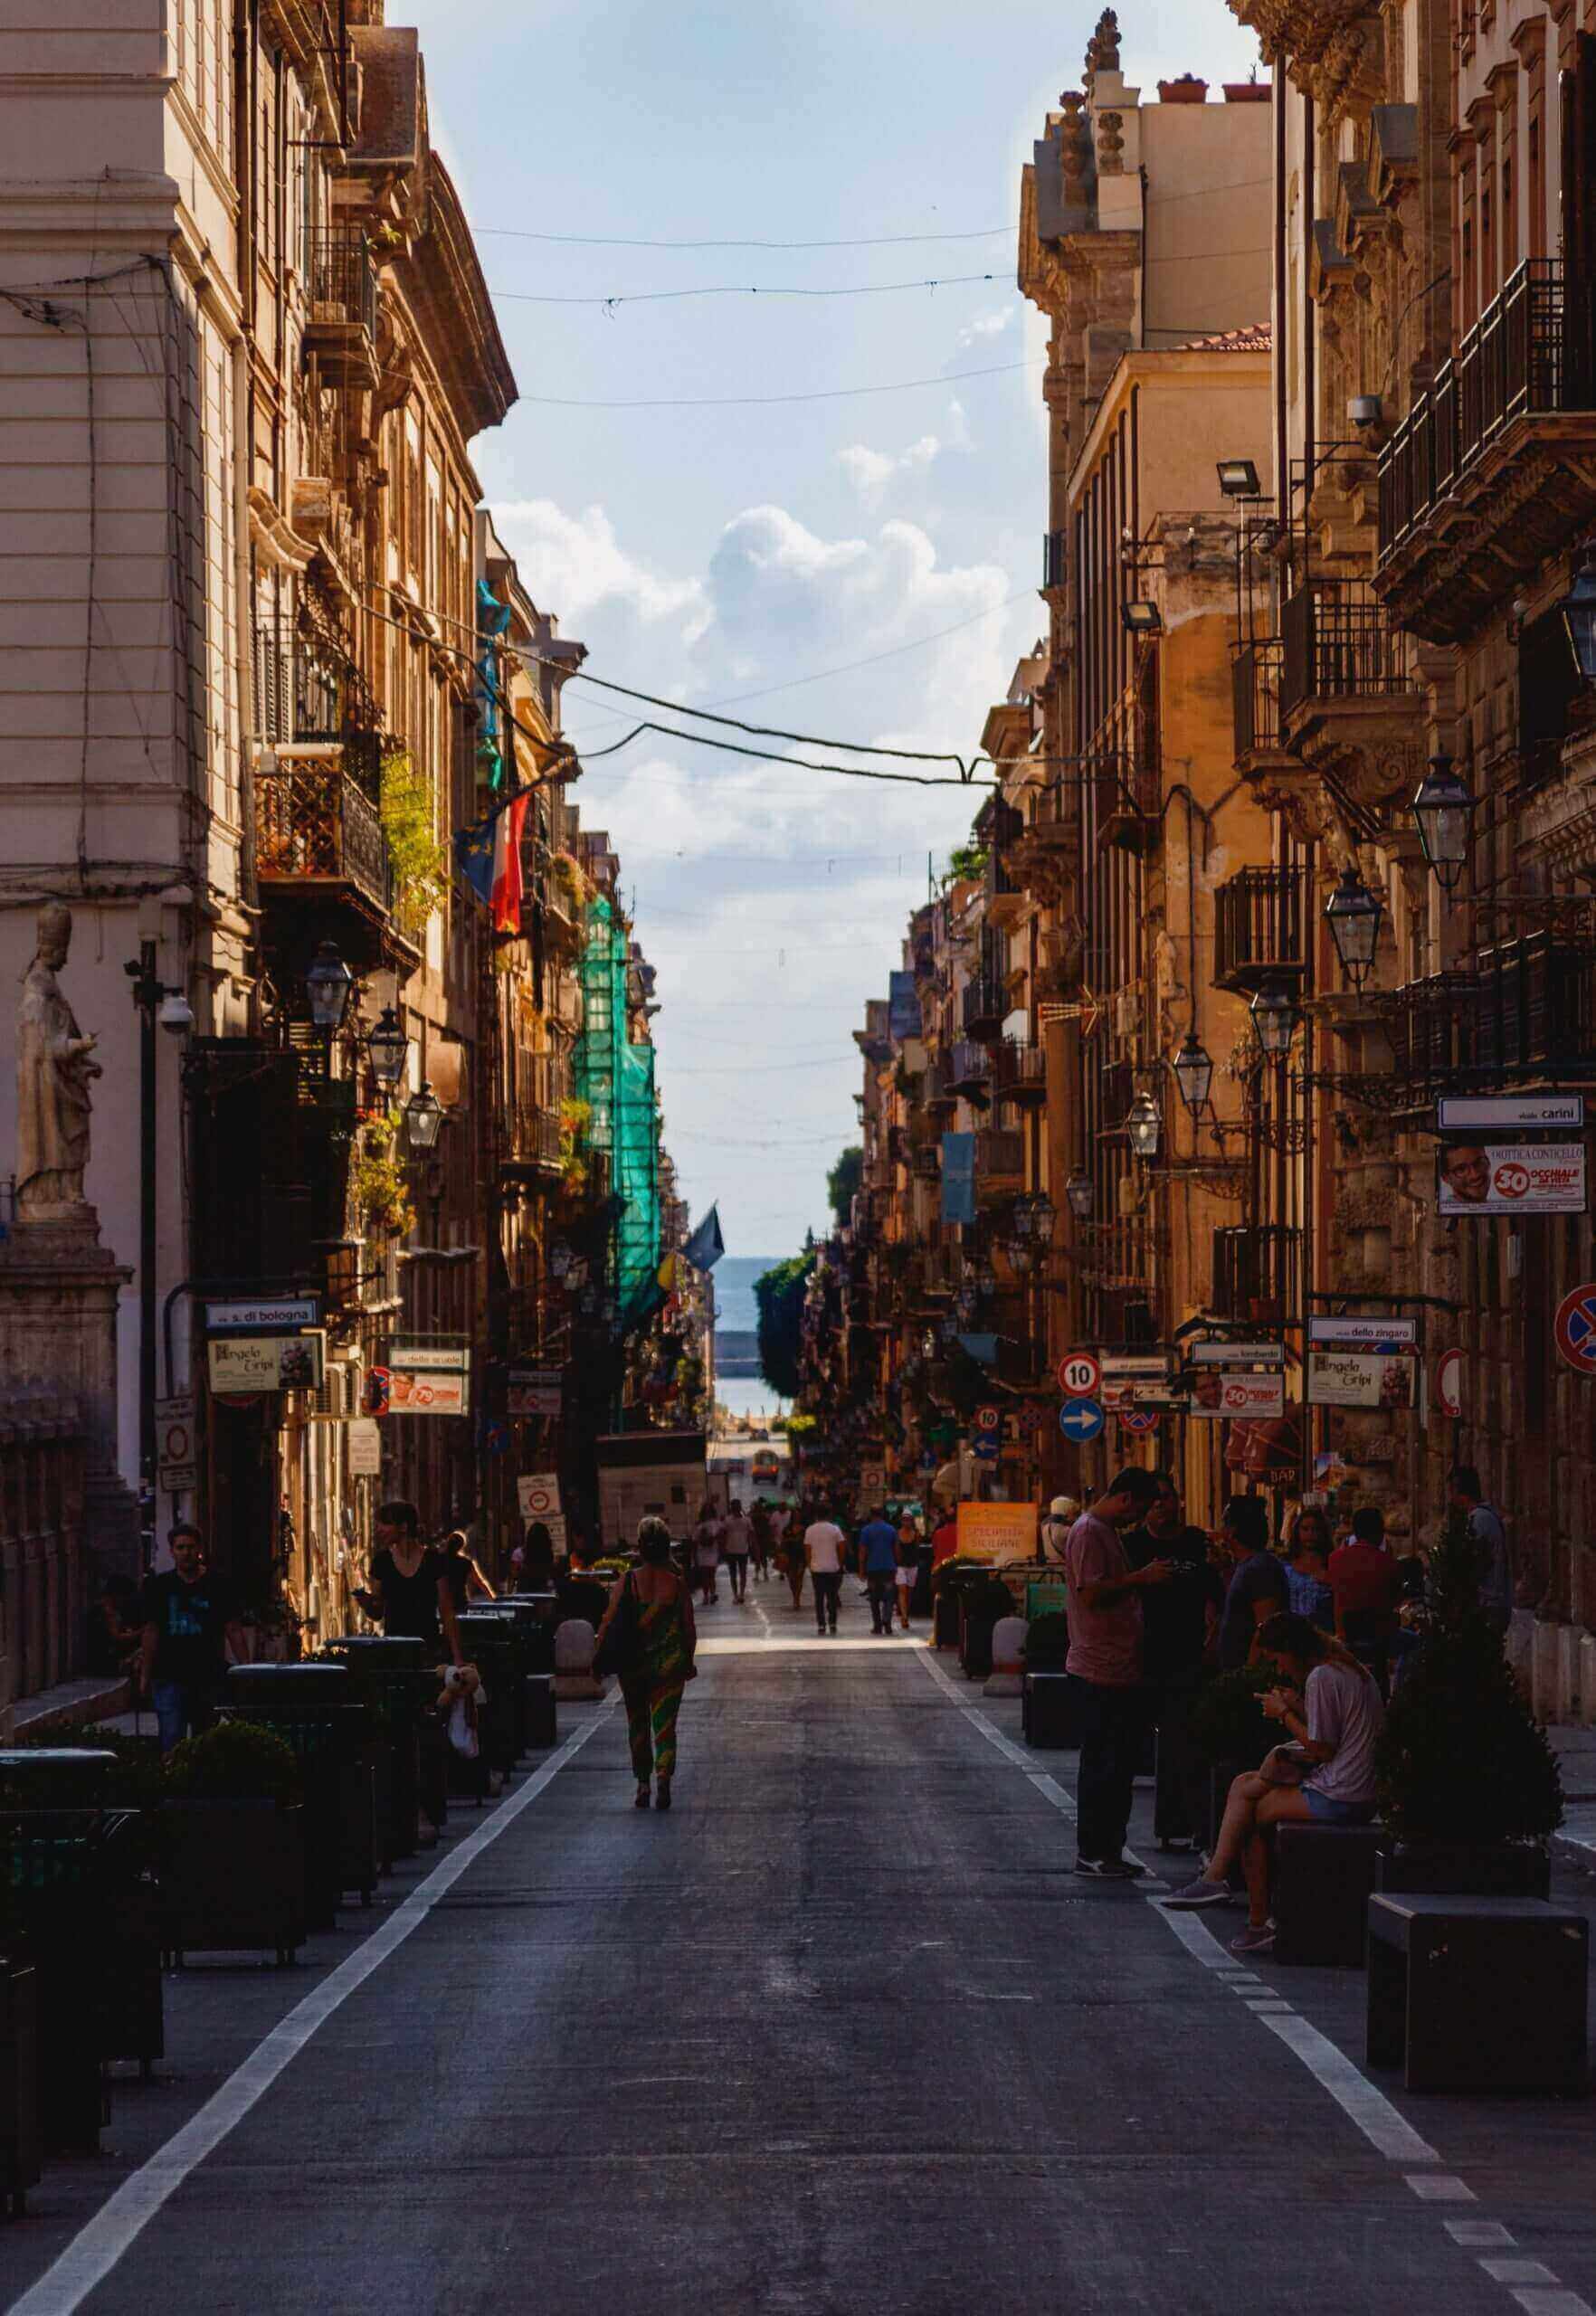 Palermo without a car